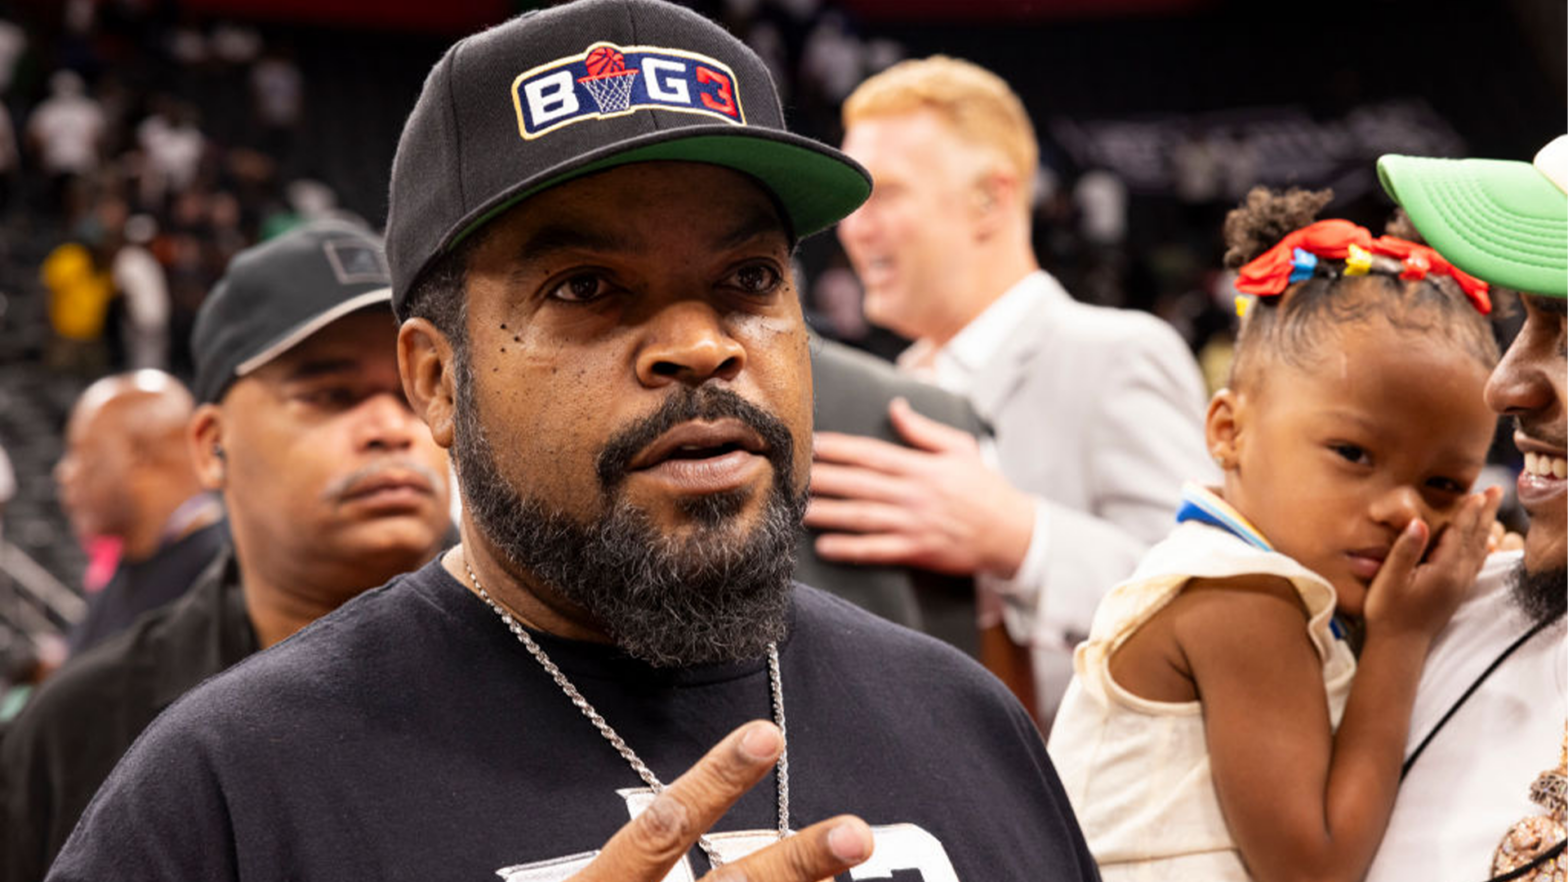 Big3, A Pro Basketball League Founded By Ice Cube, Sells Its First Team In A Reported $10M Deal